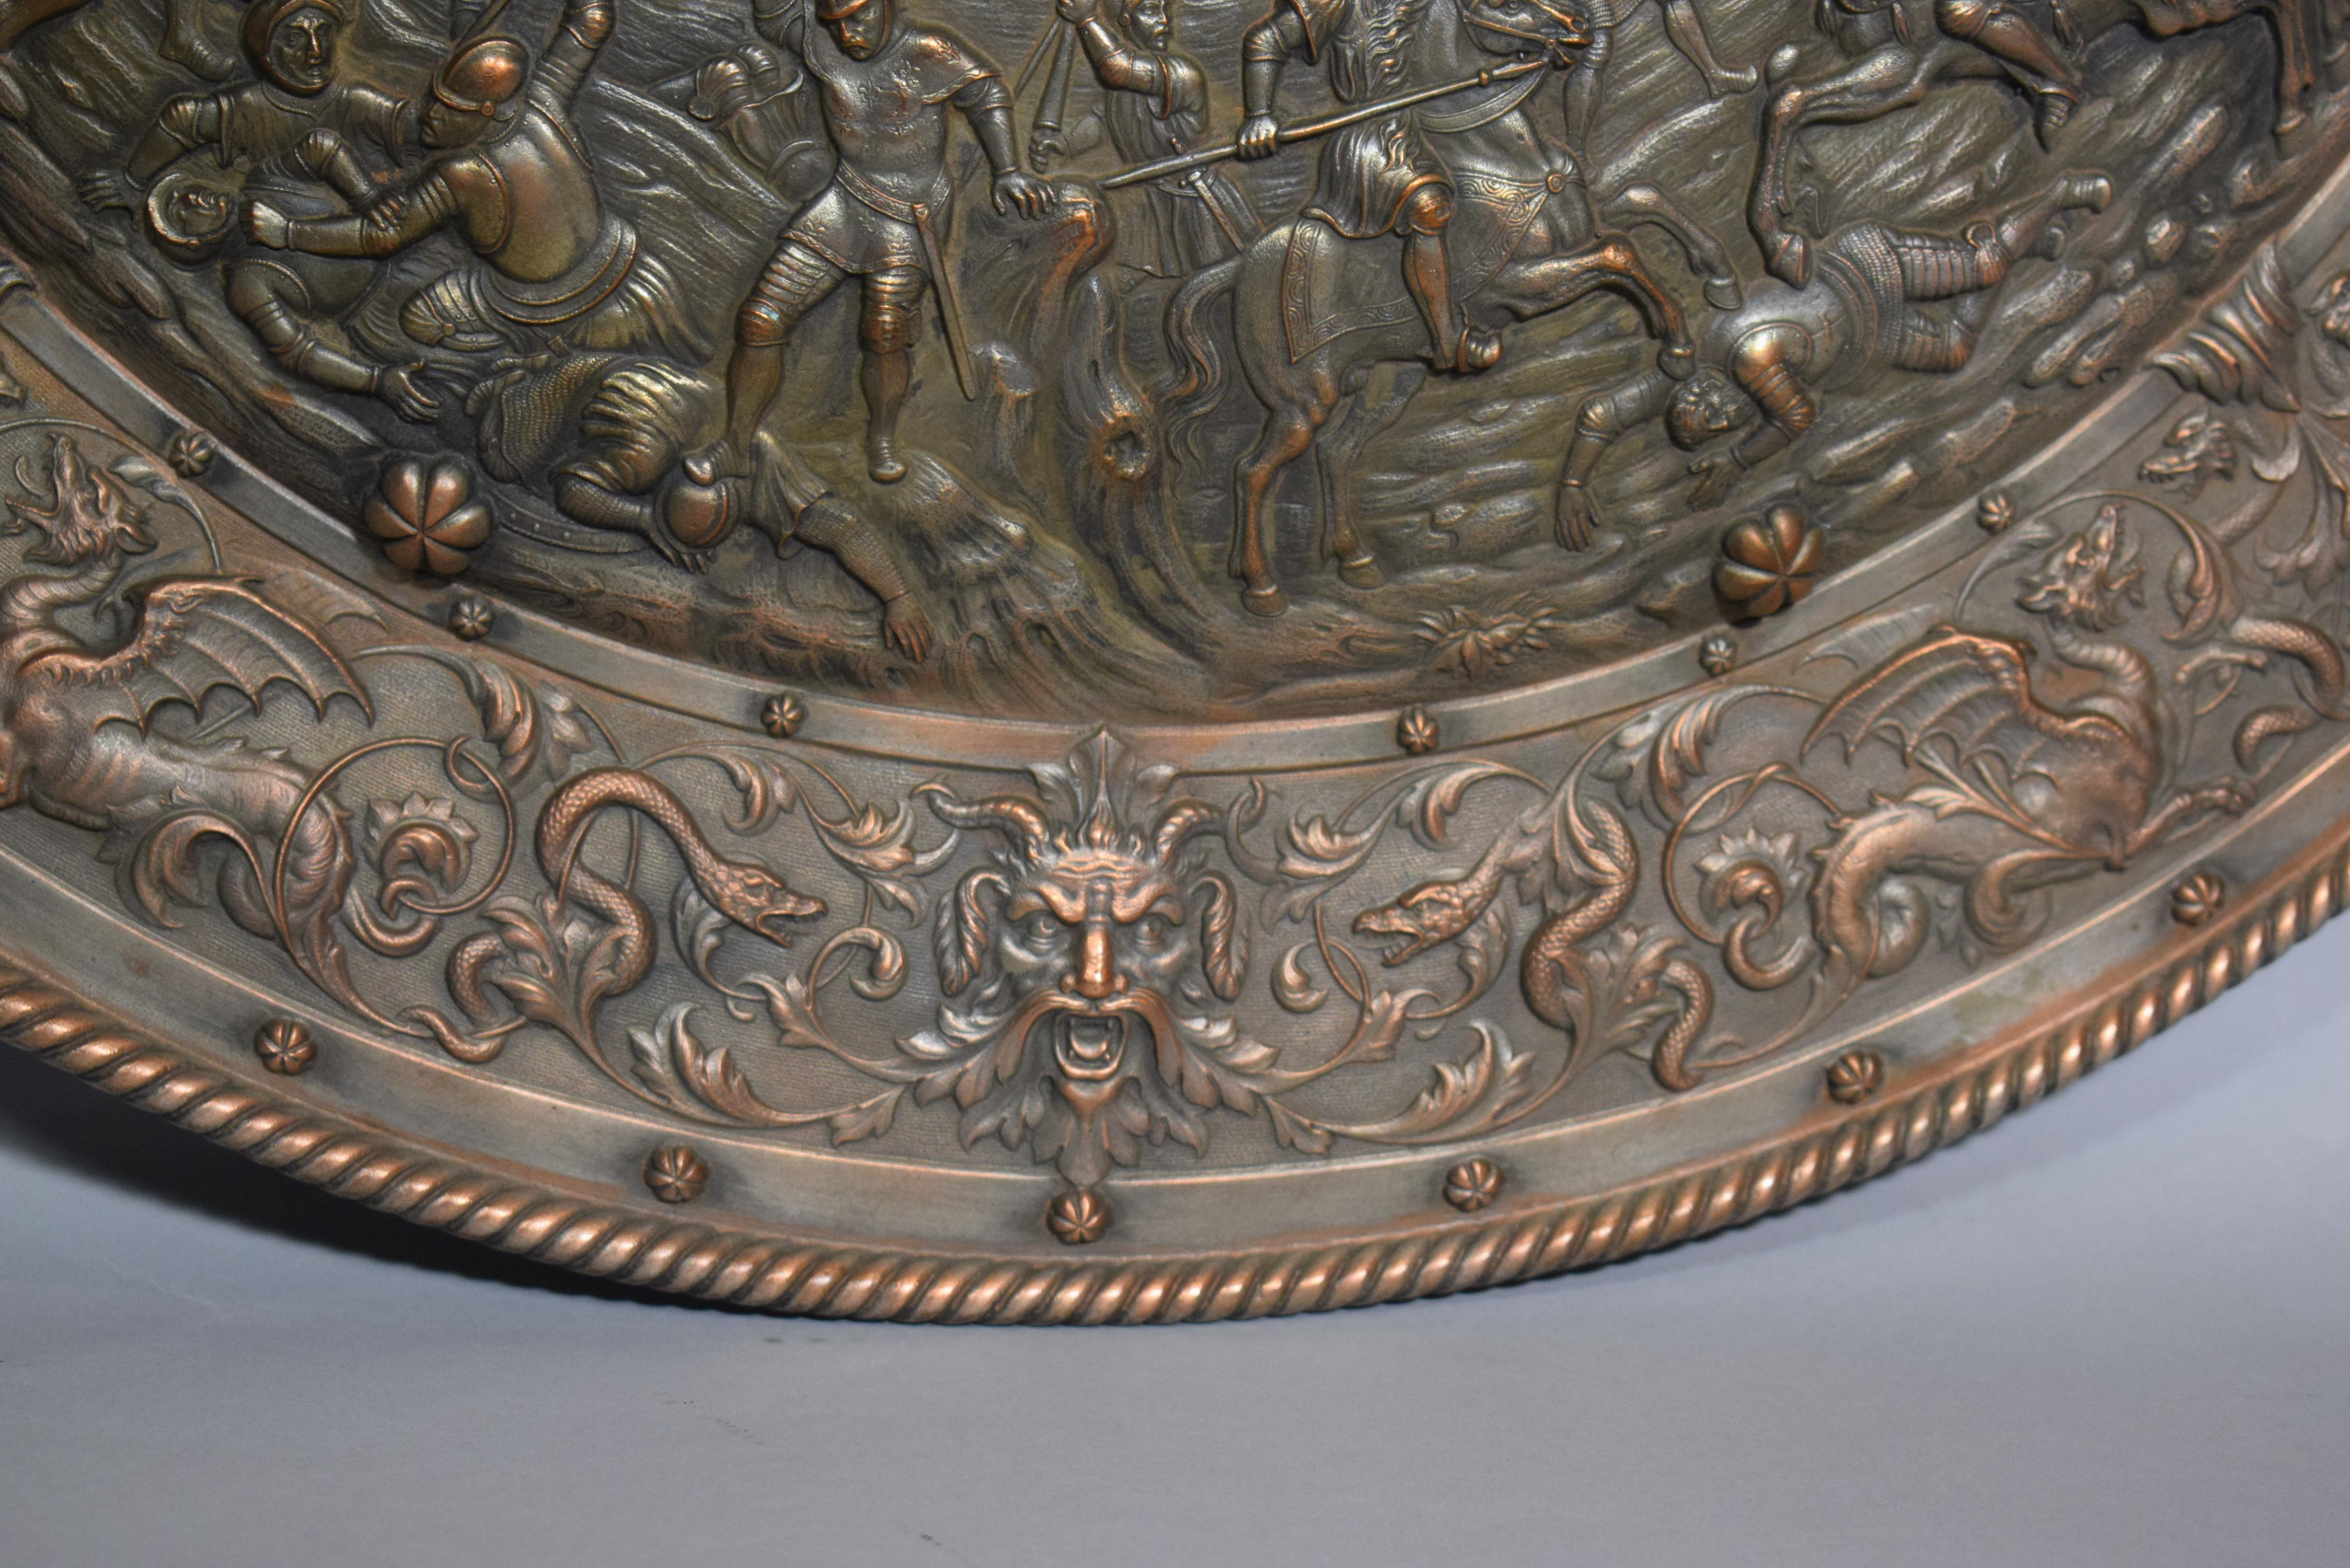 Early 19th Century Superb Silverplated Circular Shield Depicting Battle Scene